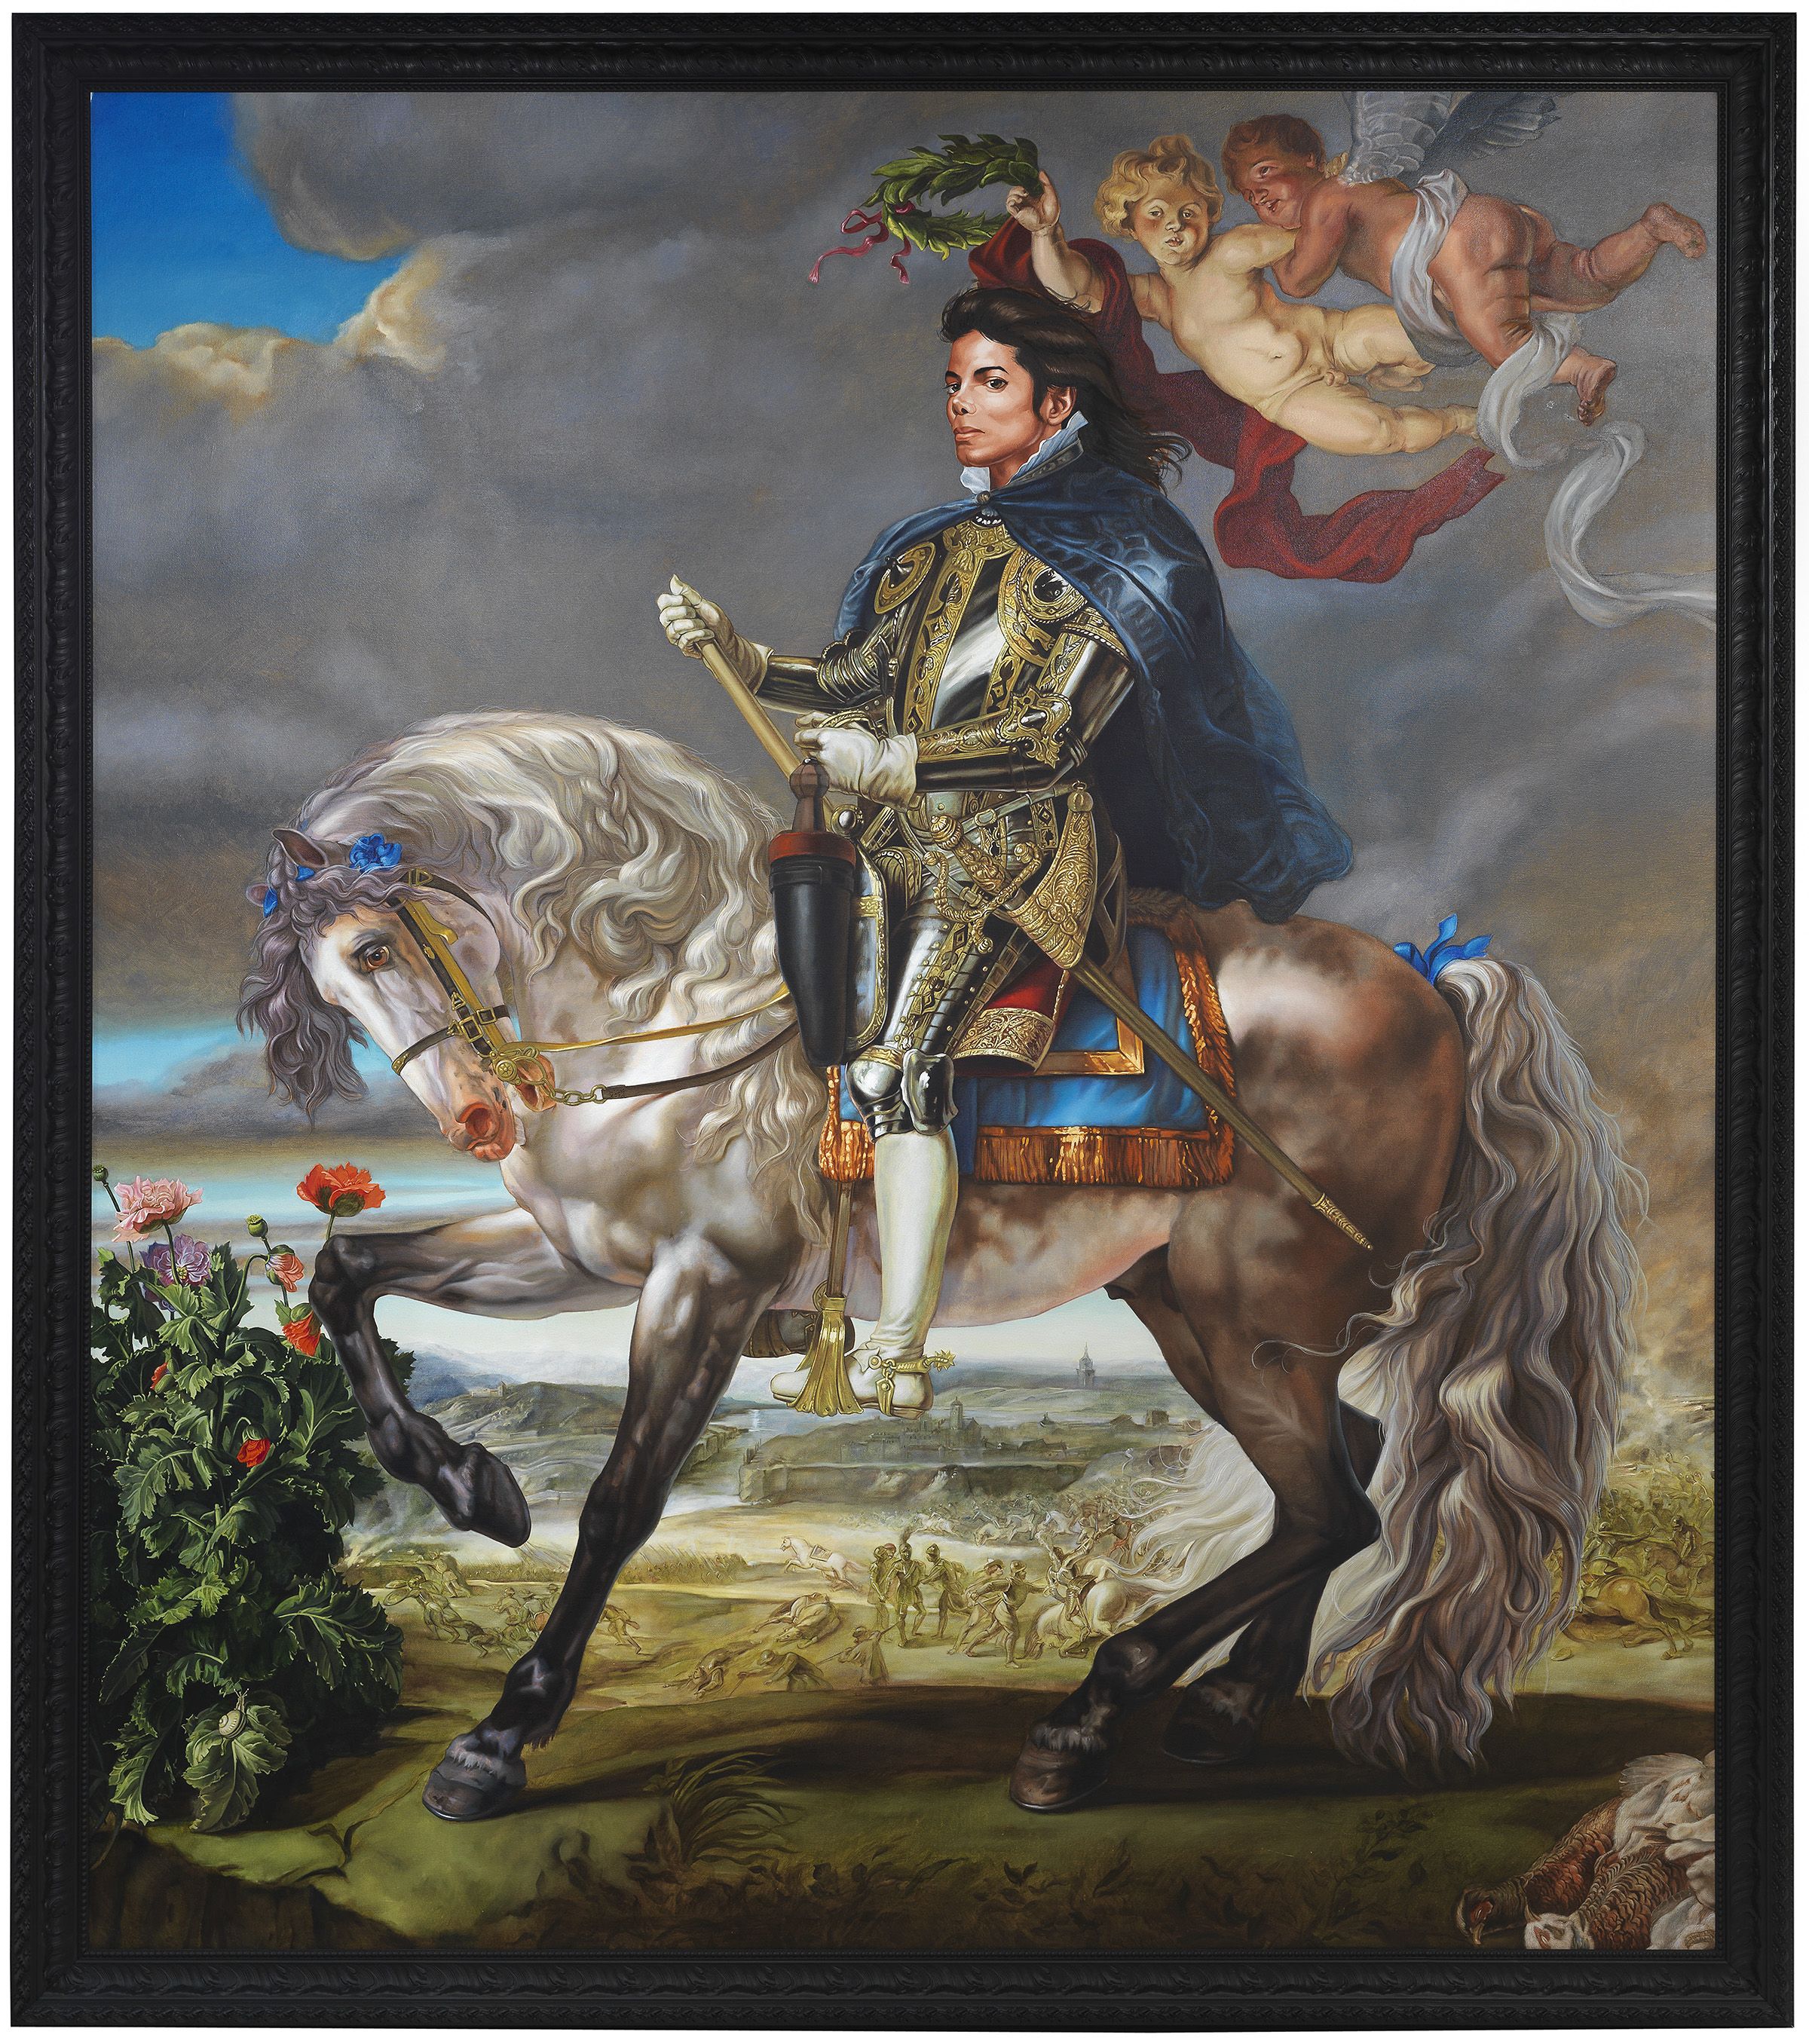 Equestrian Portrait of King Philip II (Michael Jackson) by Kehinde Wiley 2010. Olbricht Collection, Berlin. Photo by Jeurg Iseler. Courtesy of Stephen Friedman Gallery, London and Sean Kelly Gallery, New York © Kehinde Wiley